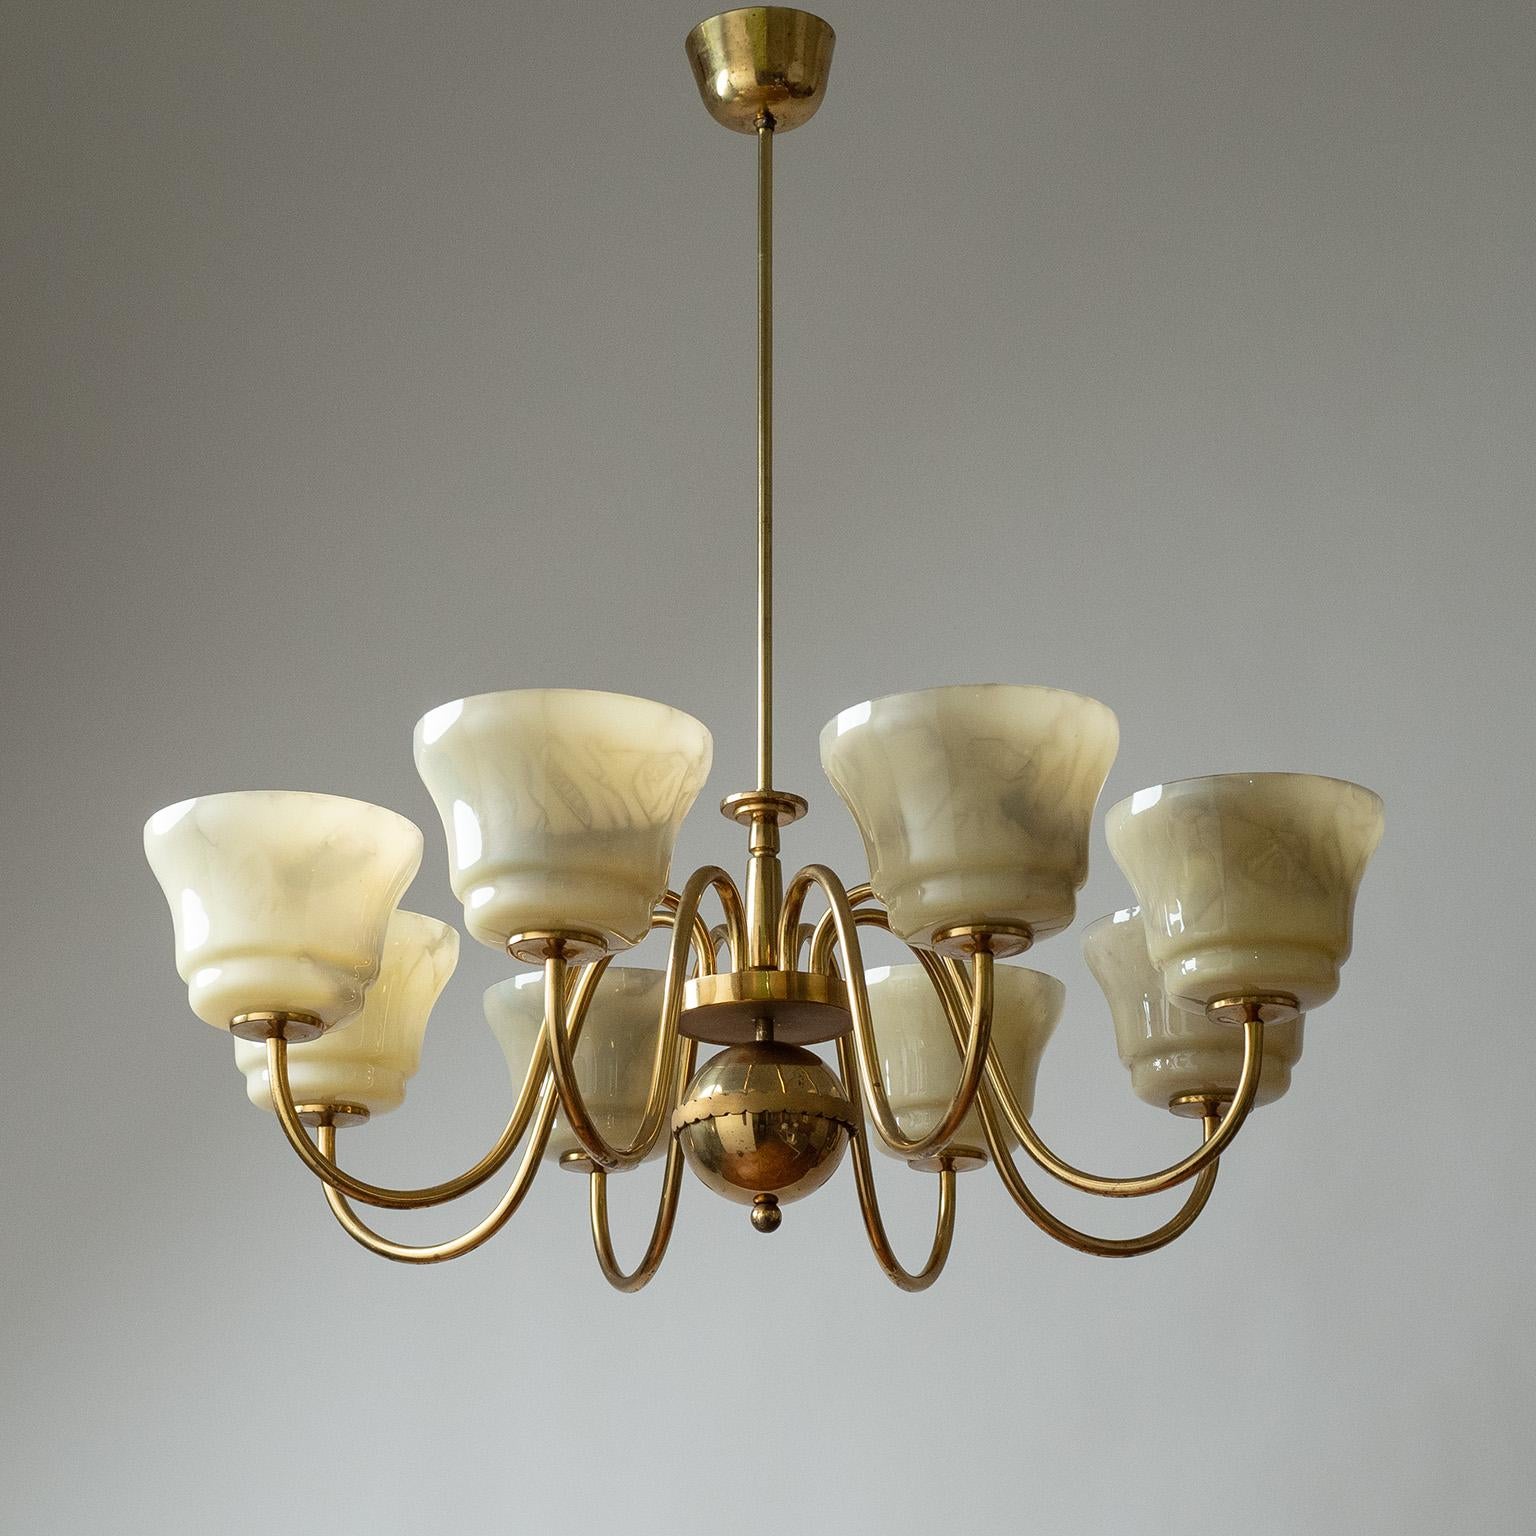 Large Brass Chandelier with Enameled Glass Shades, 1940s For Sale 2